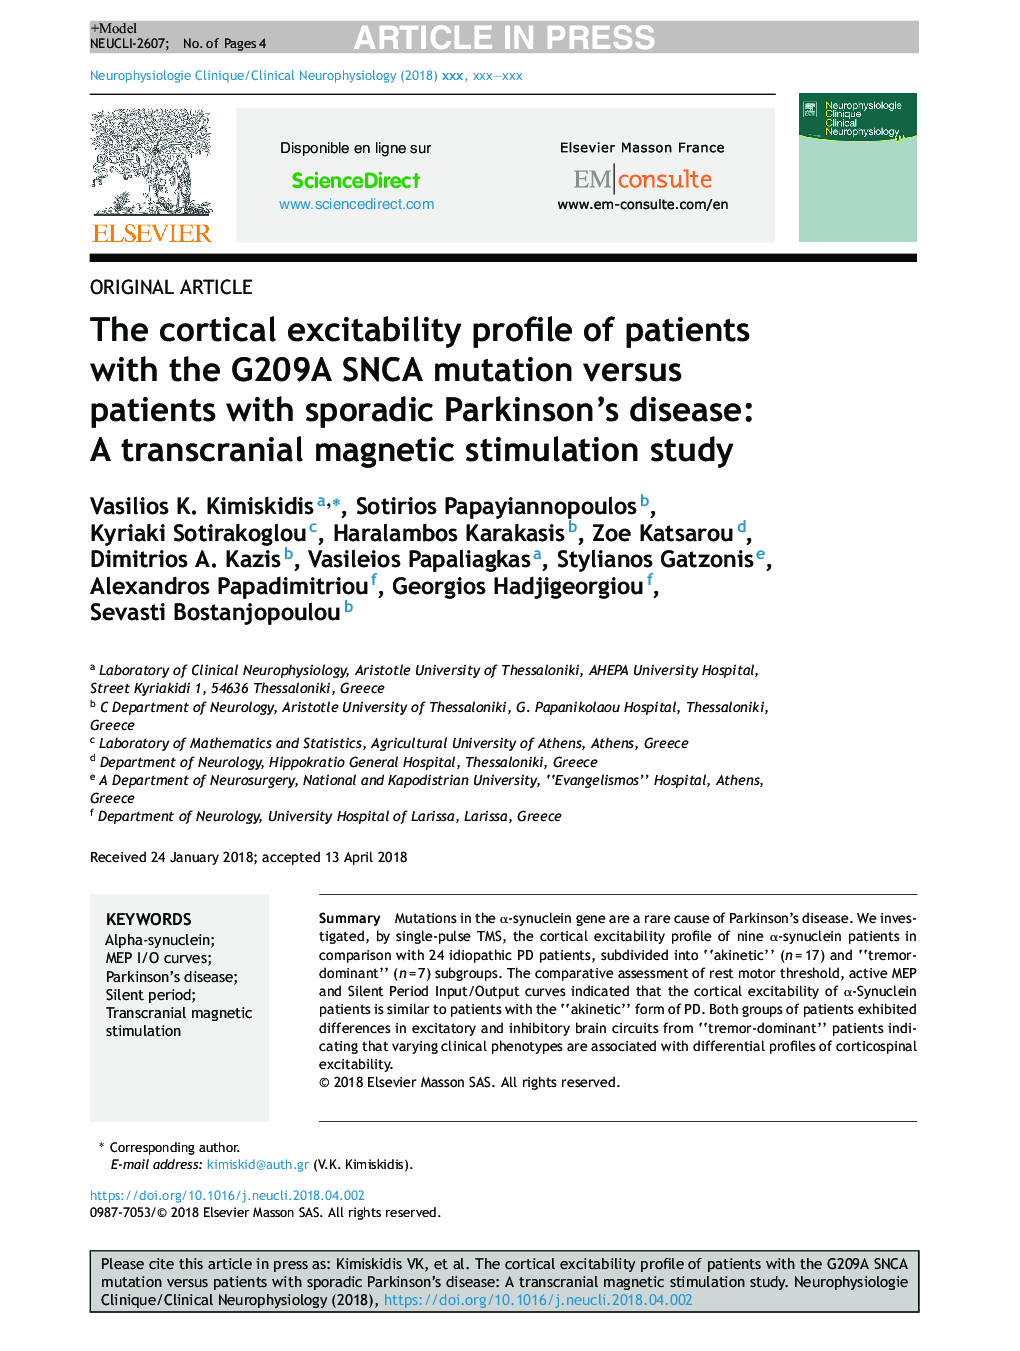 The cortical excitability profile of patients with the G209A SNCA mutation versus patients with sporadic Parkinson's disease: A transcranial magnetic stimulation study